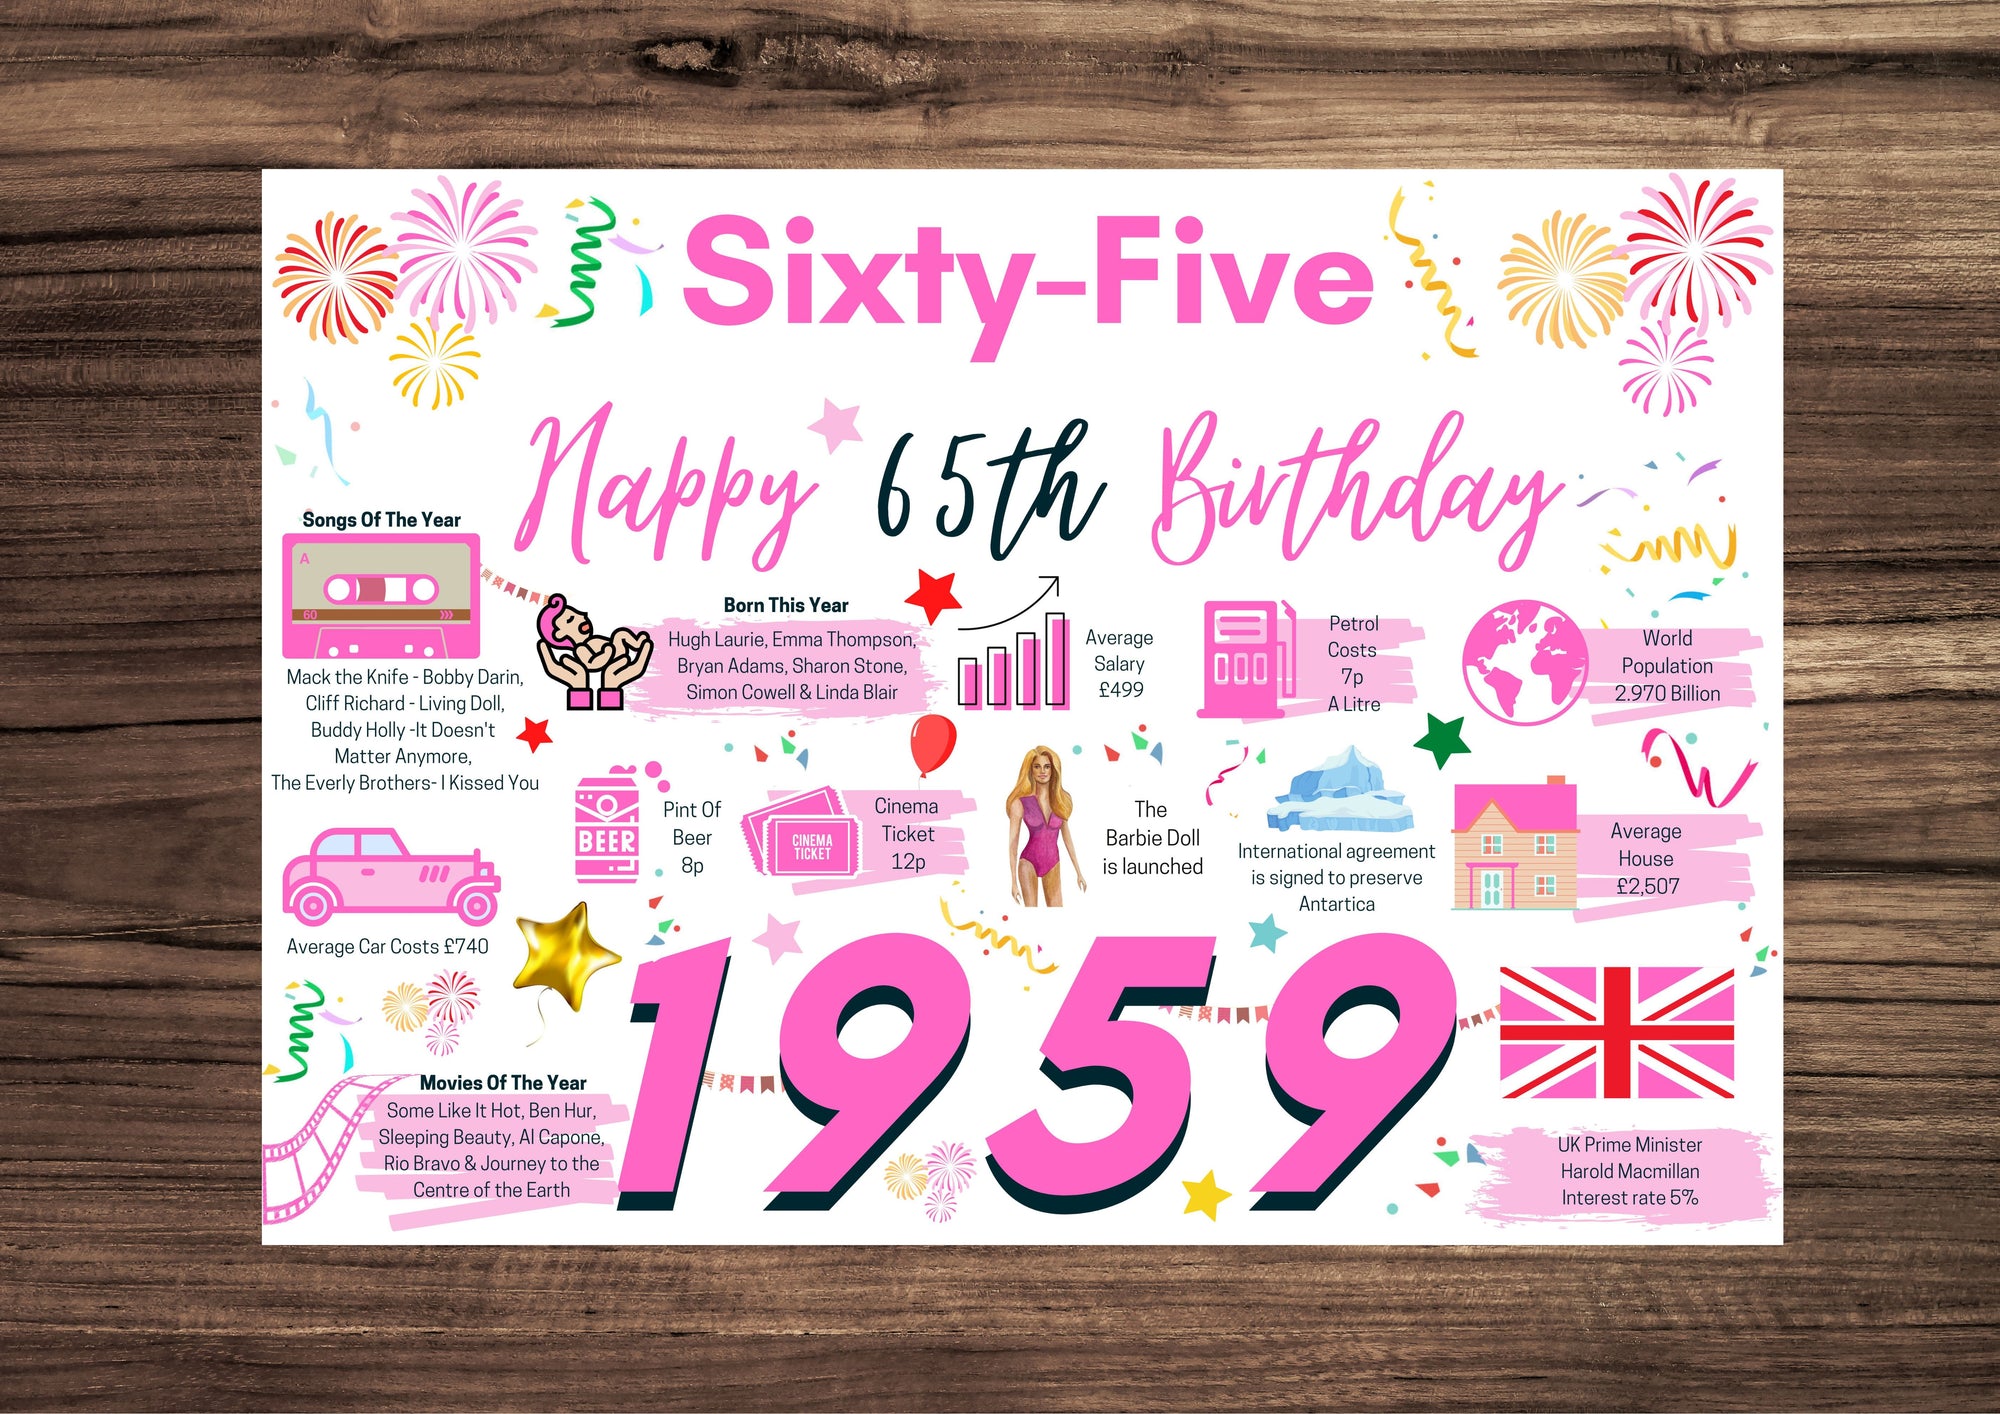 65th Birthday Card For Her Sixtyfive, Born In 1959 Facts Milestone